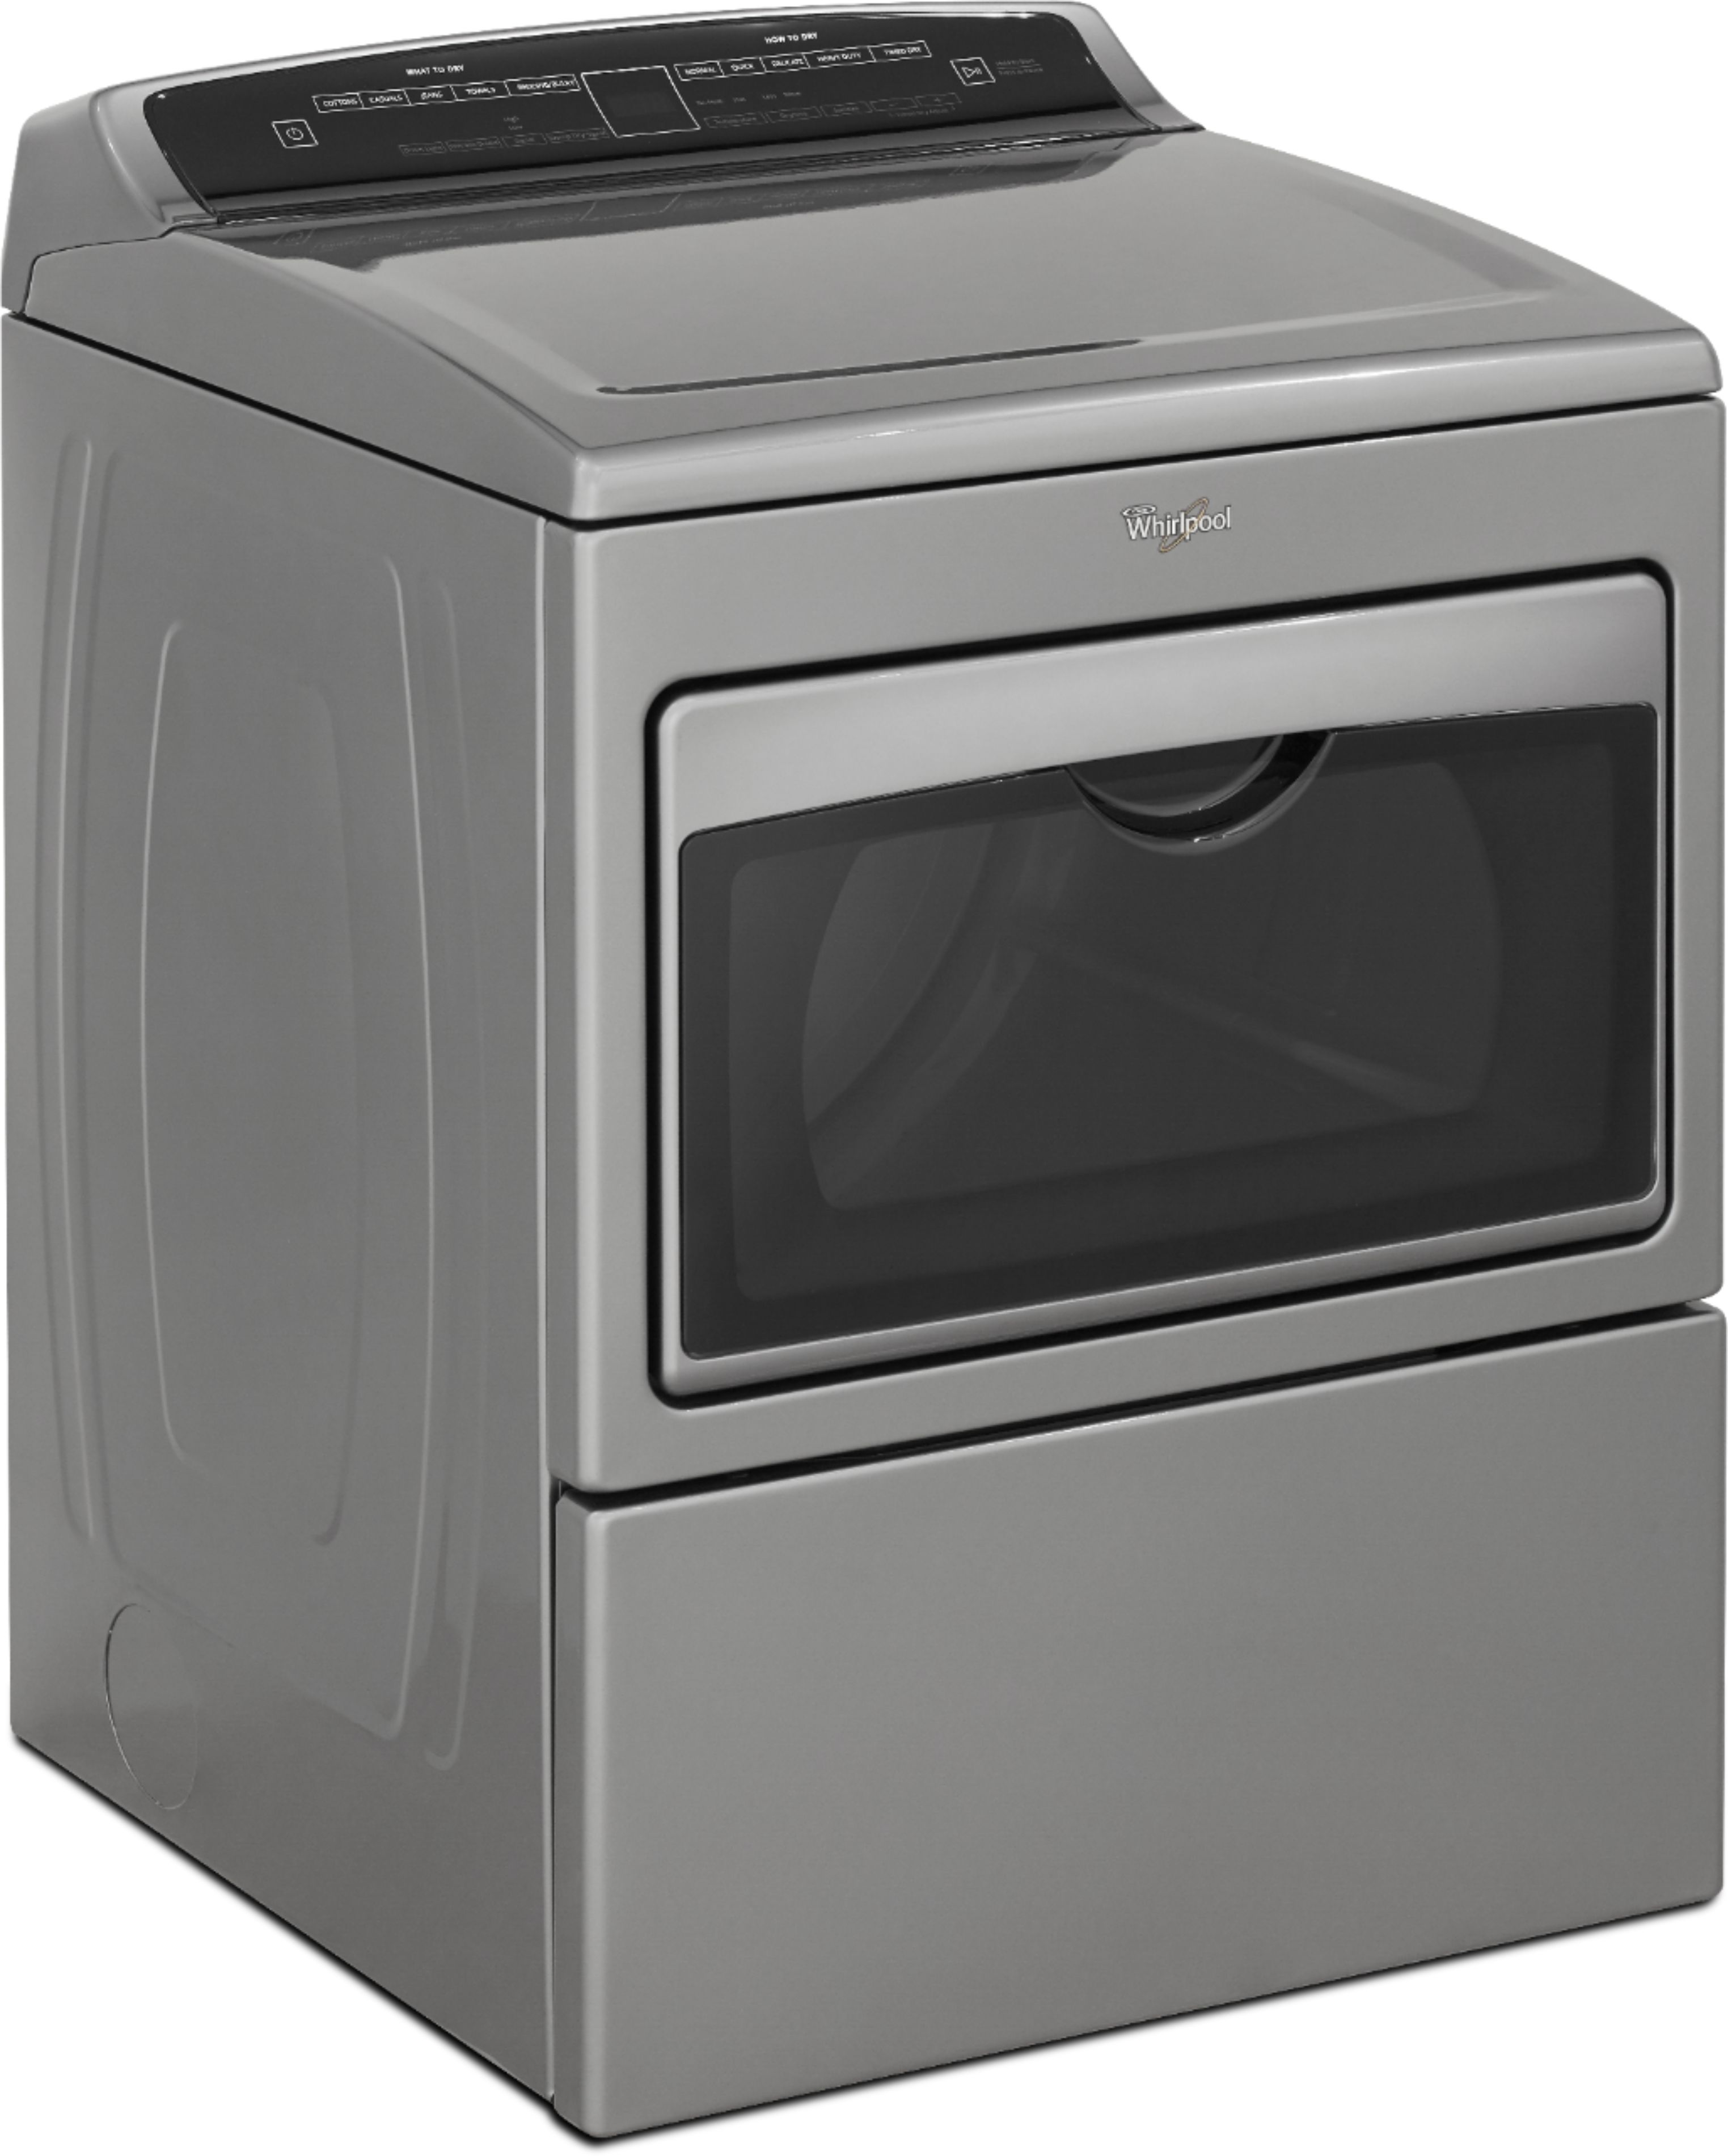 Angle View: Whirlpool - 7.4 Cu. Ft. 26-Cycle Electric Dryer - Chrome shadow